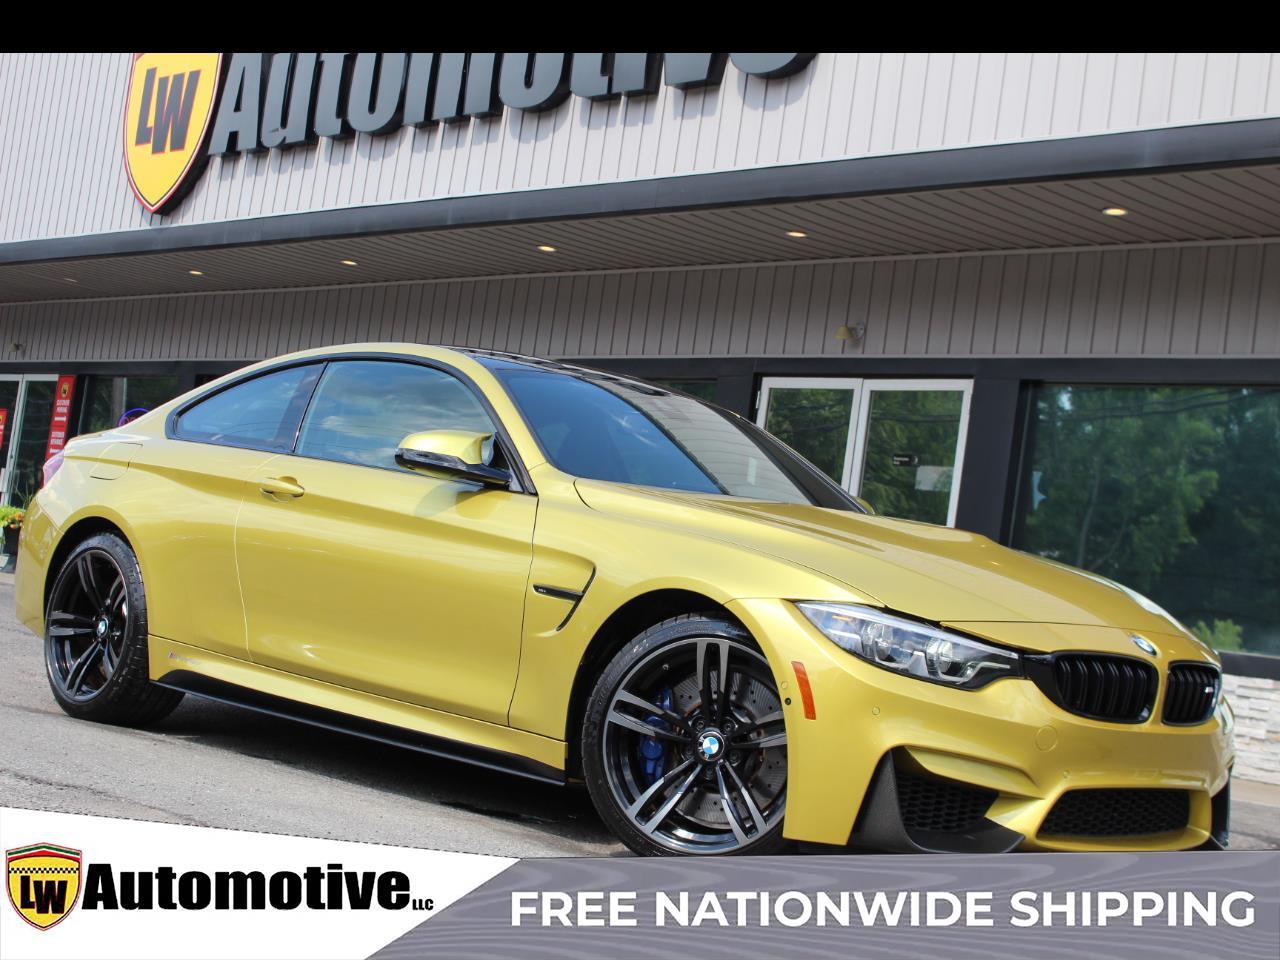 2020 BMW M4 Coupe